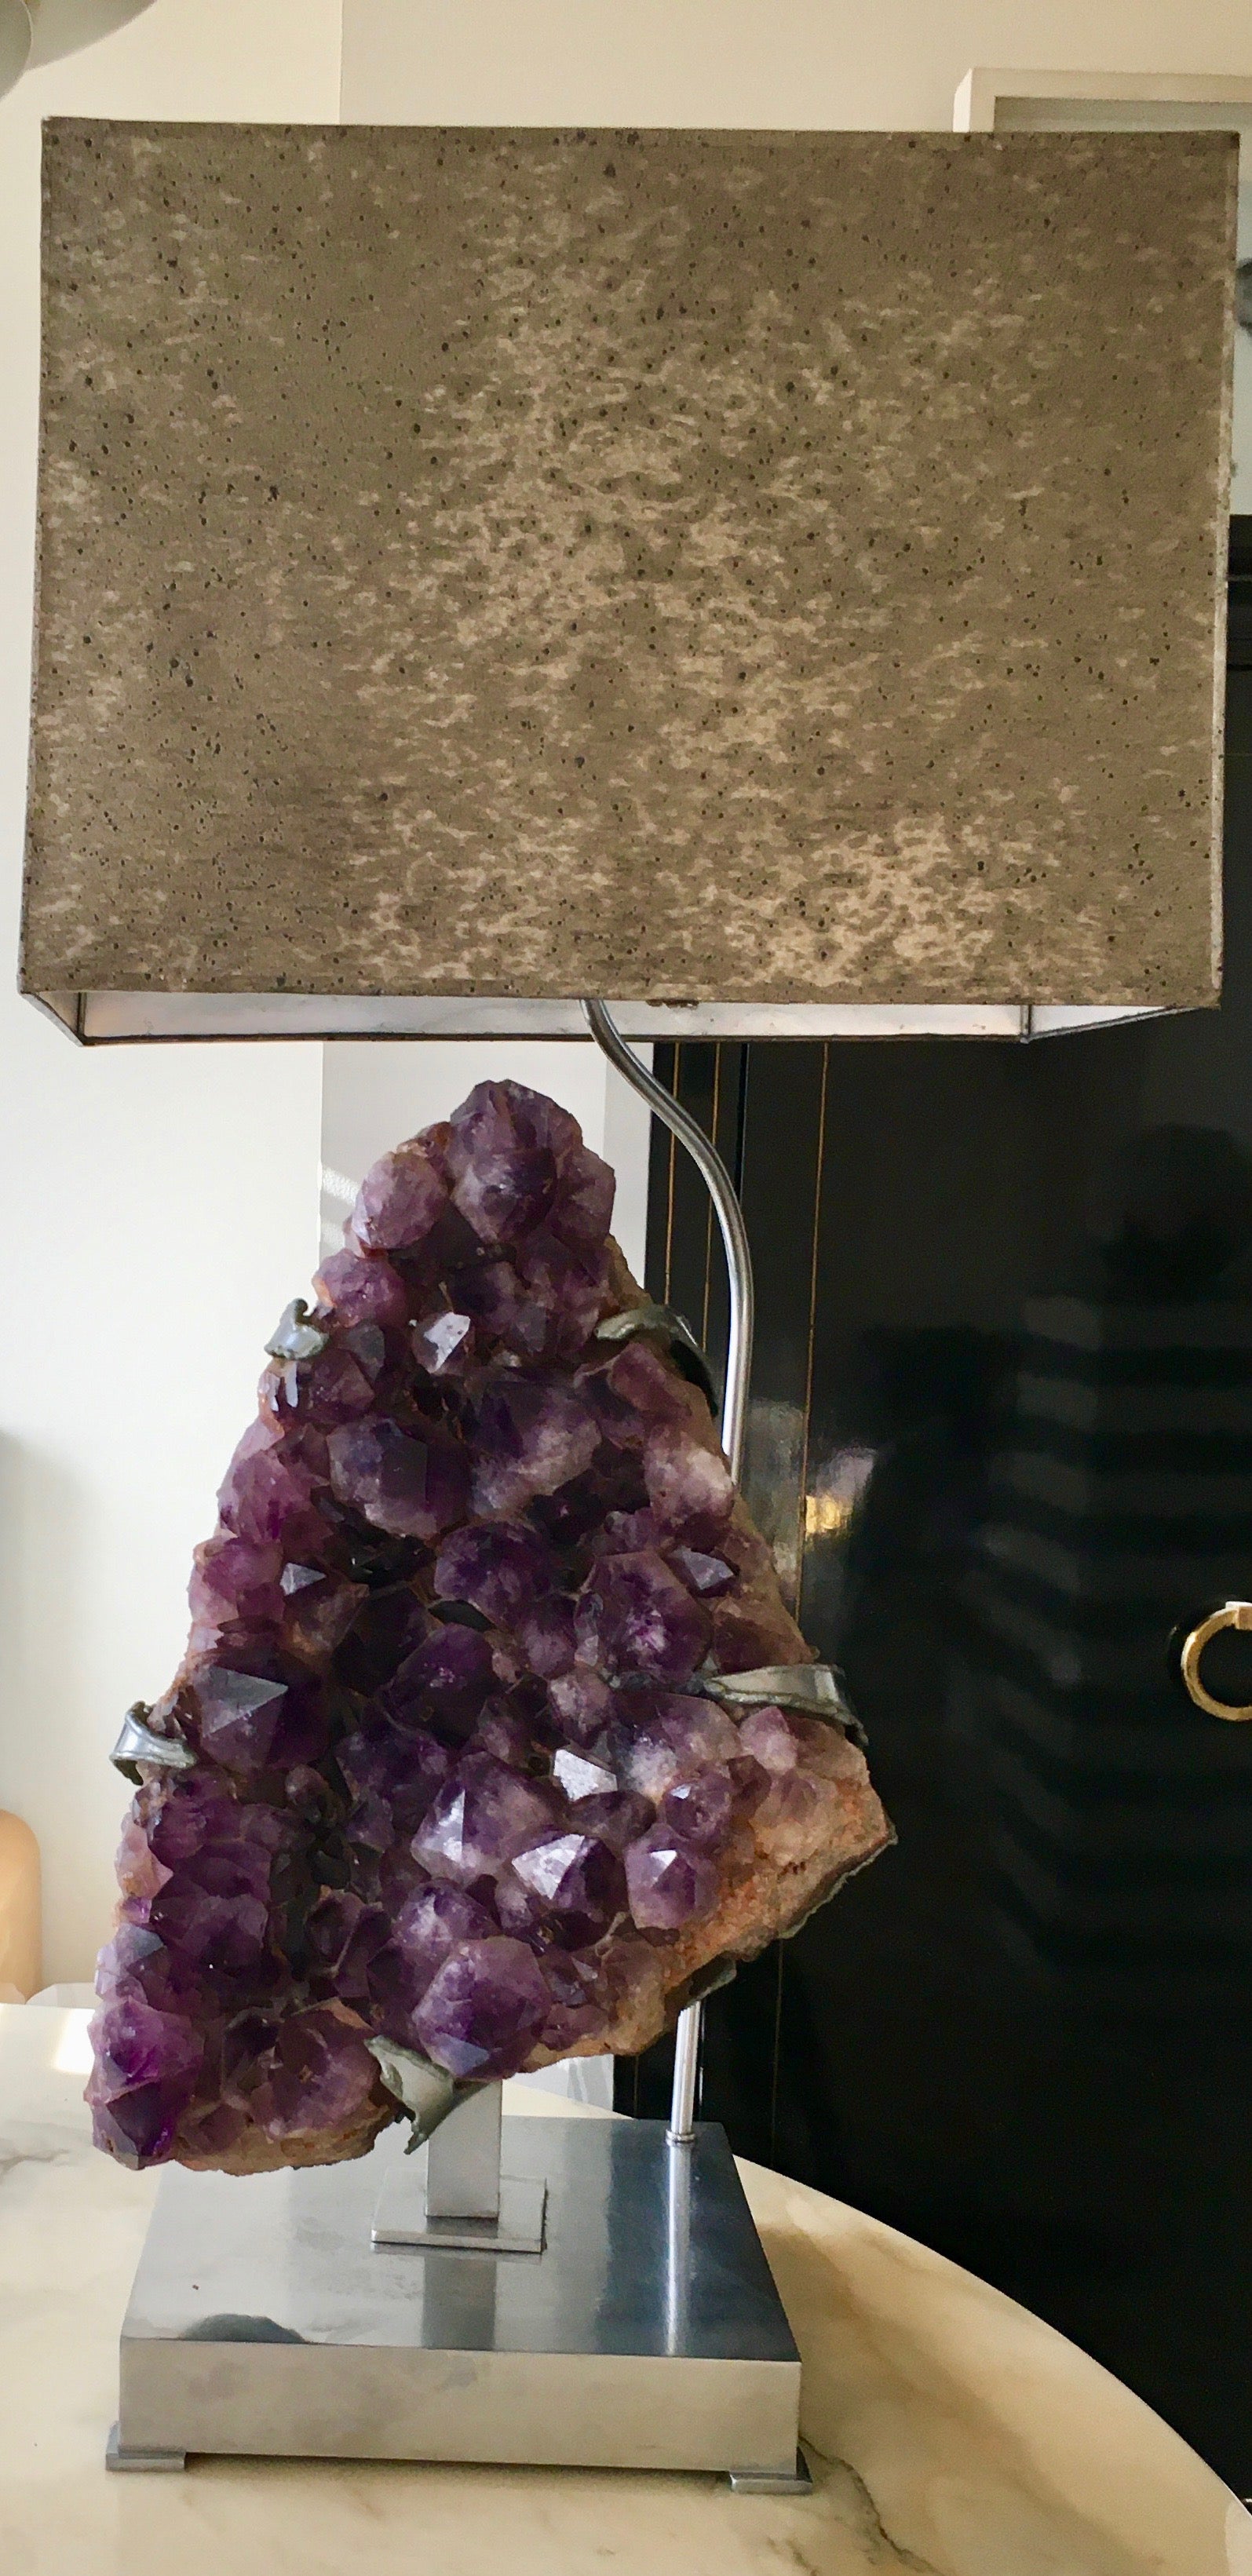 One of a kind giant amethyst geode lamp table.
Two lights.Coming with his original silver cardboard shade.
Designed by Willy Daro. 
Belgium 1968.
Unsigned.